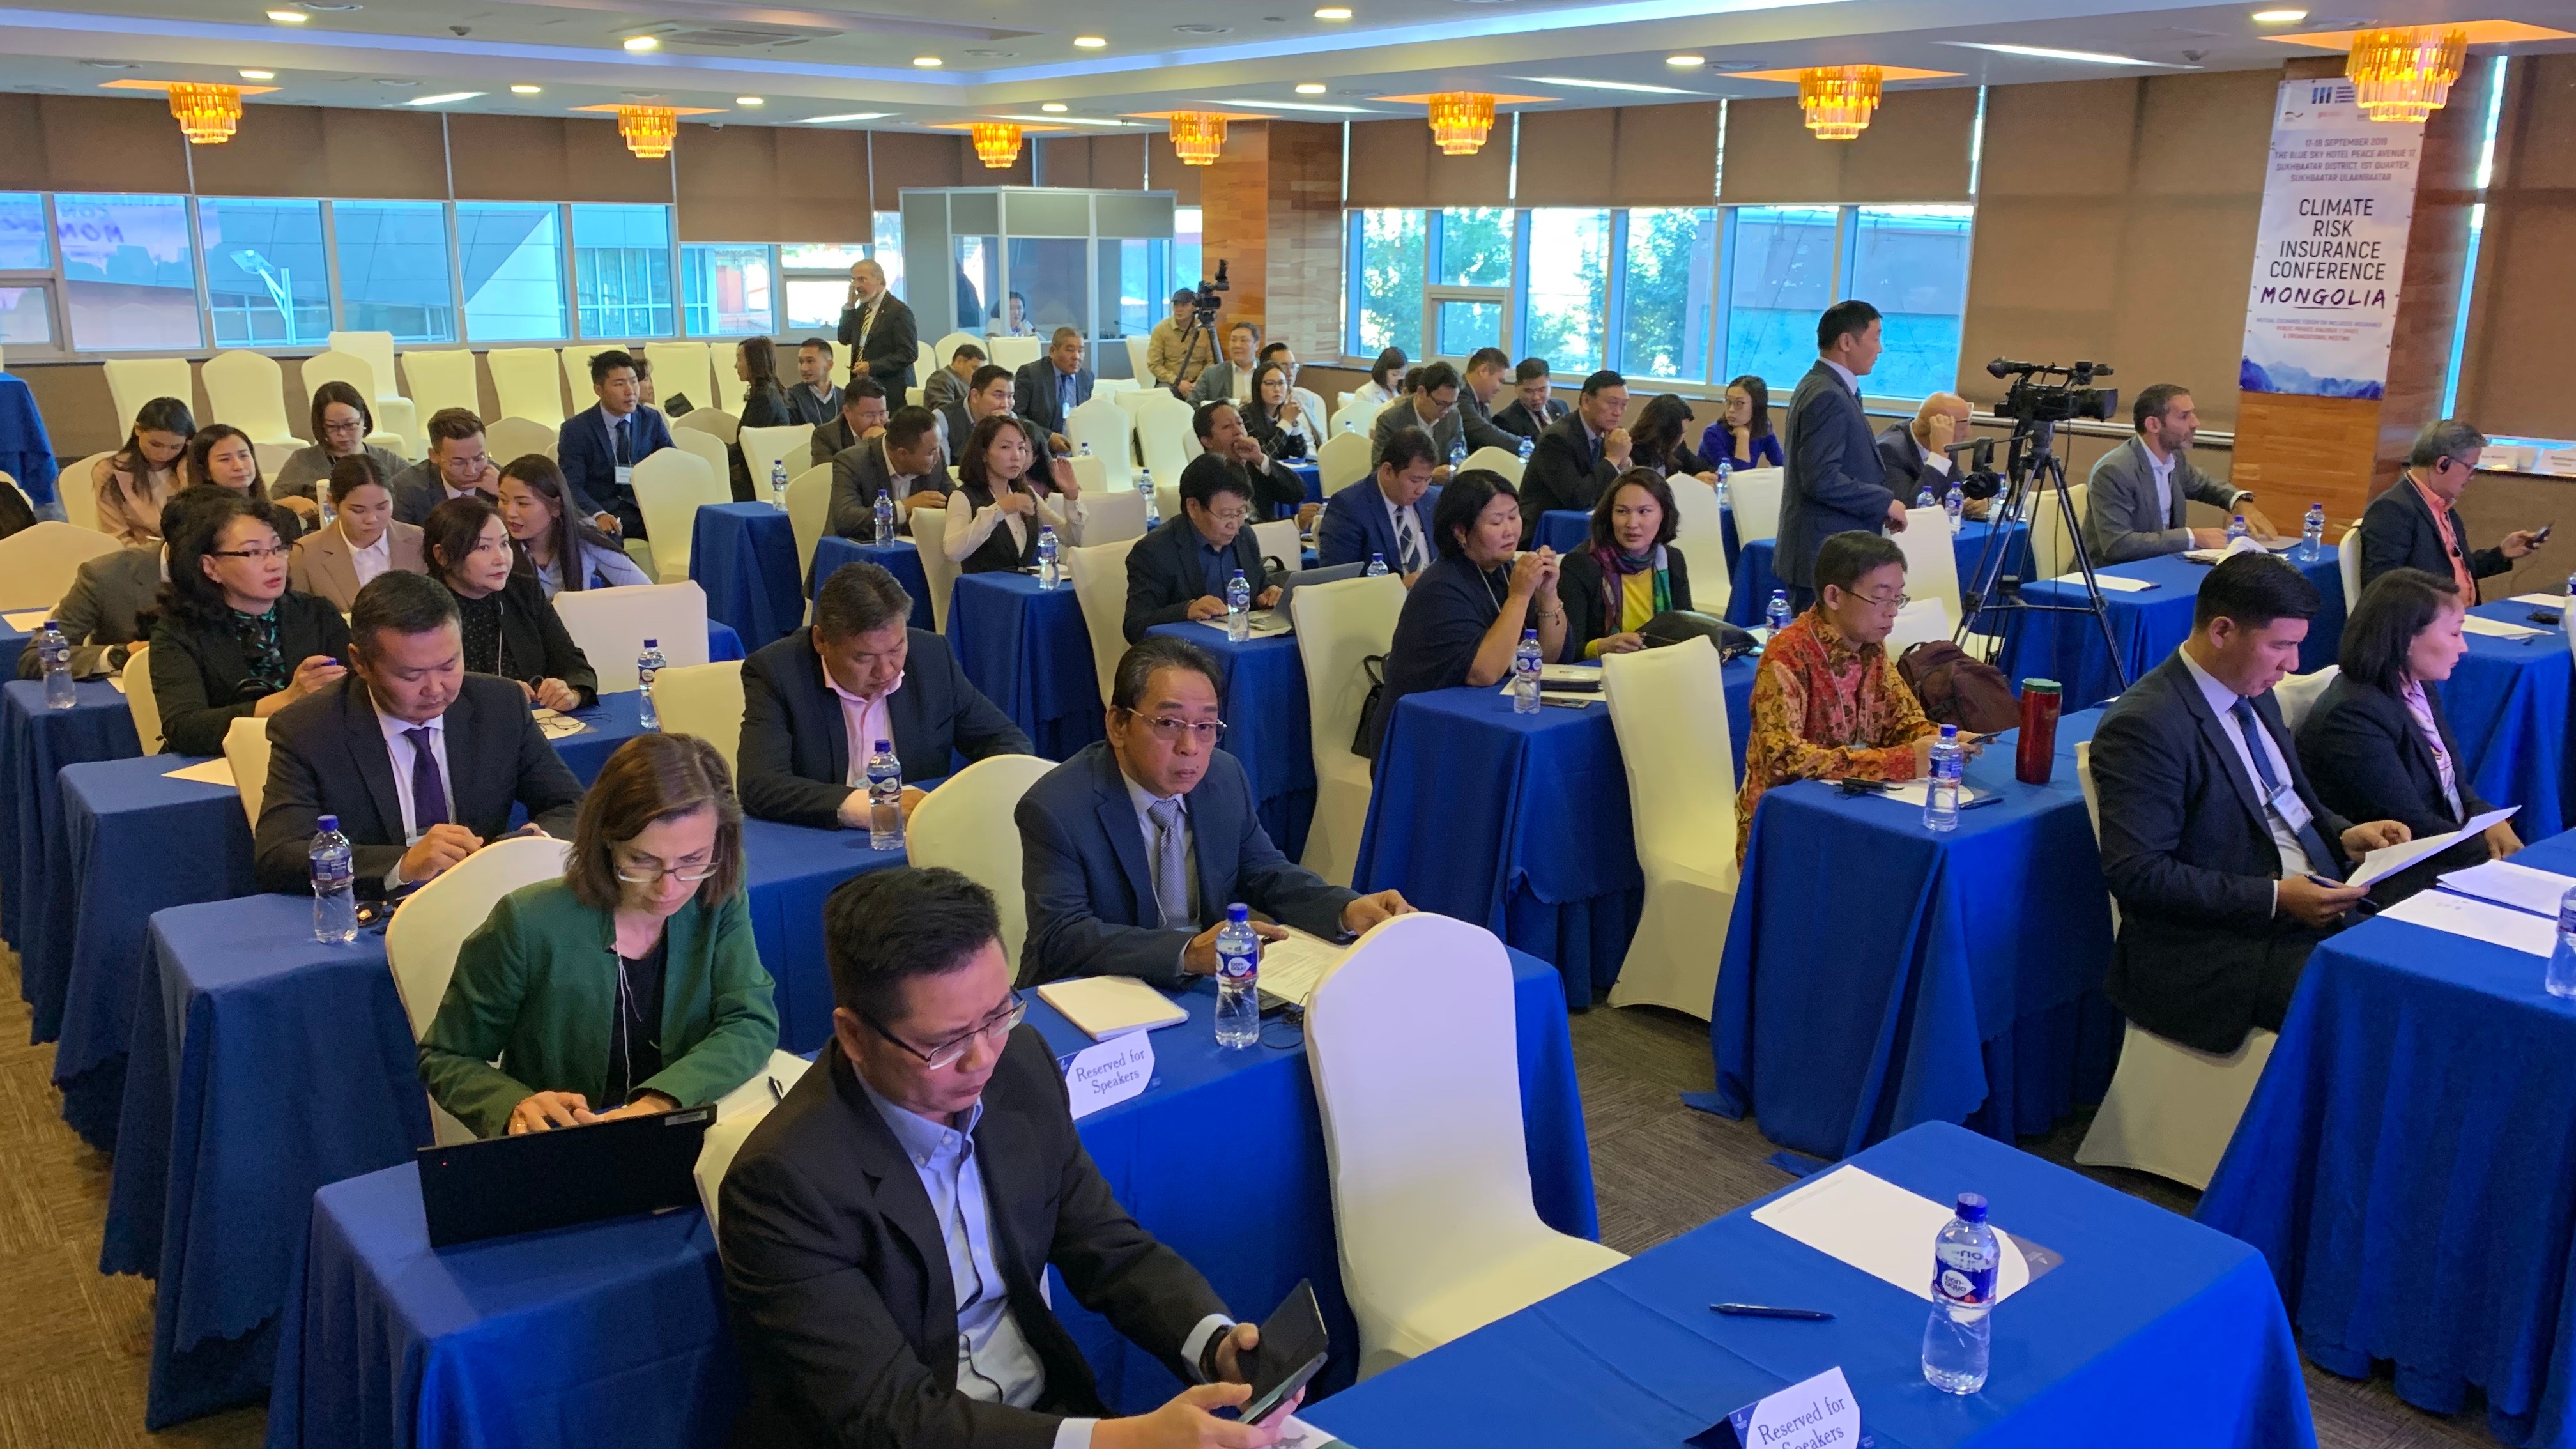 Around 70 experts from 8 countries participated in the Climate Risk Insurance conference.